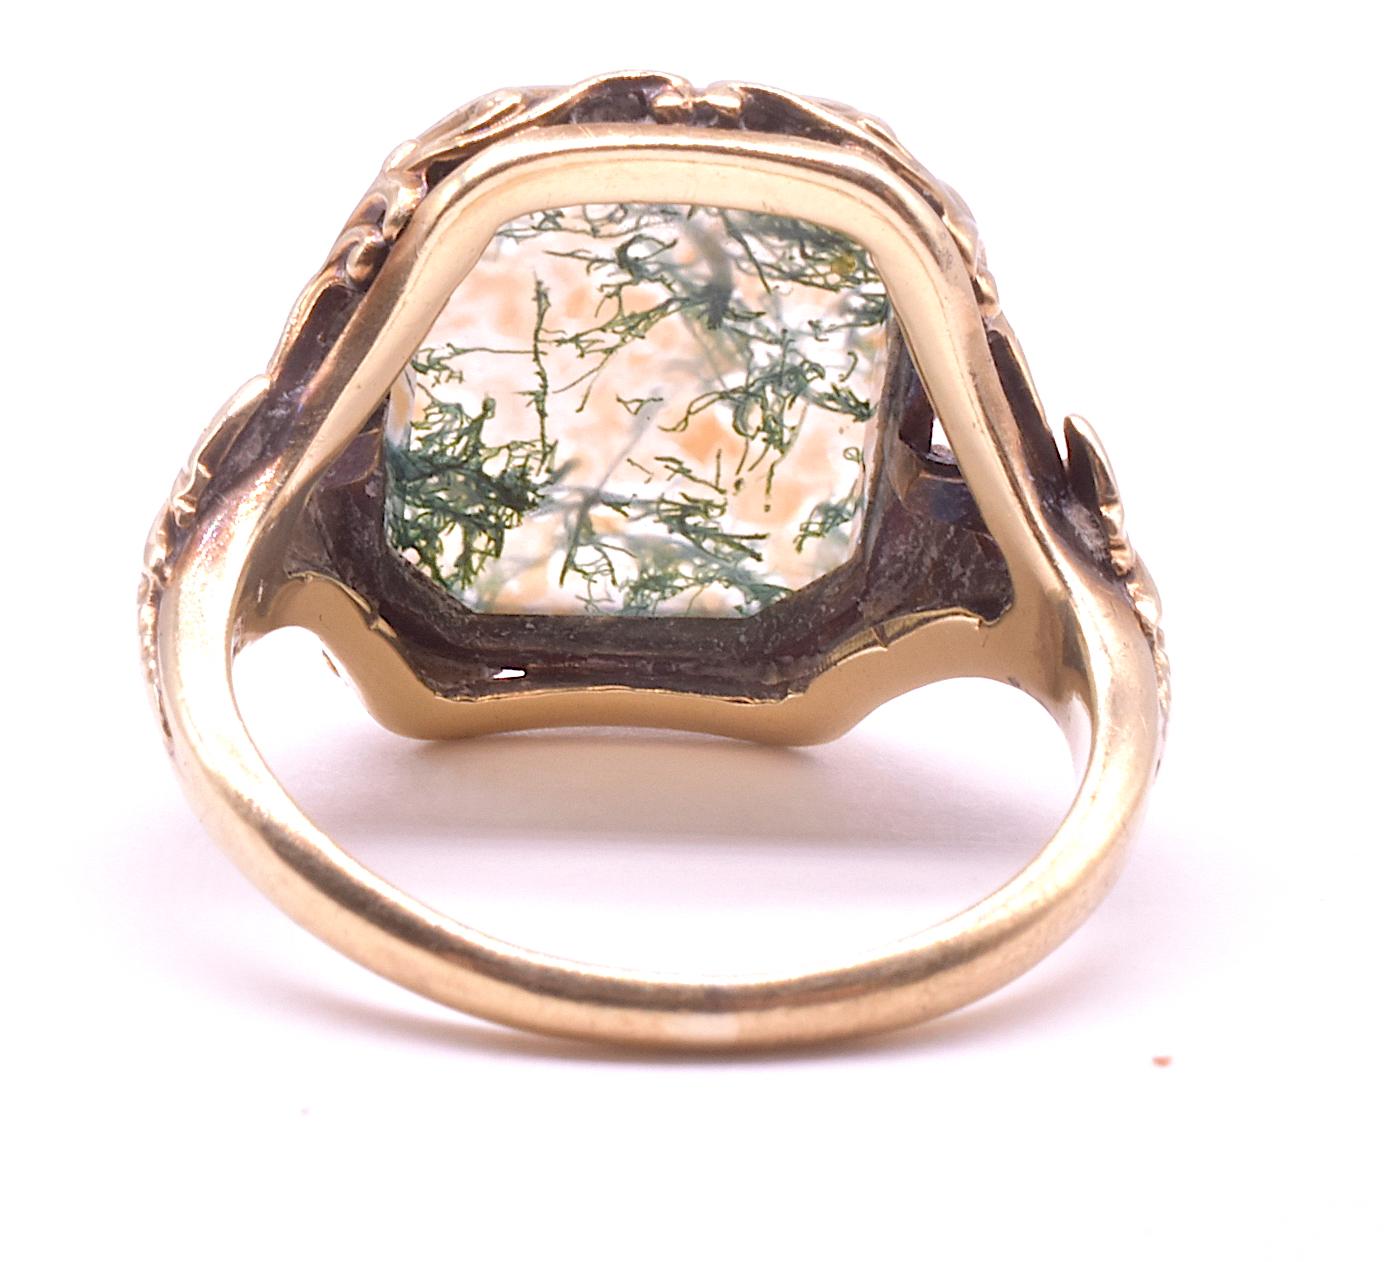 Dendritic Agate is from the chalcedony family of stones and is translucent to opaque in color, depending on whether it is open in the back or closed. The perfectly shaped and highly polished dendritic agate on our 15K gold backed ring is opaque,